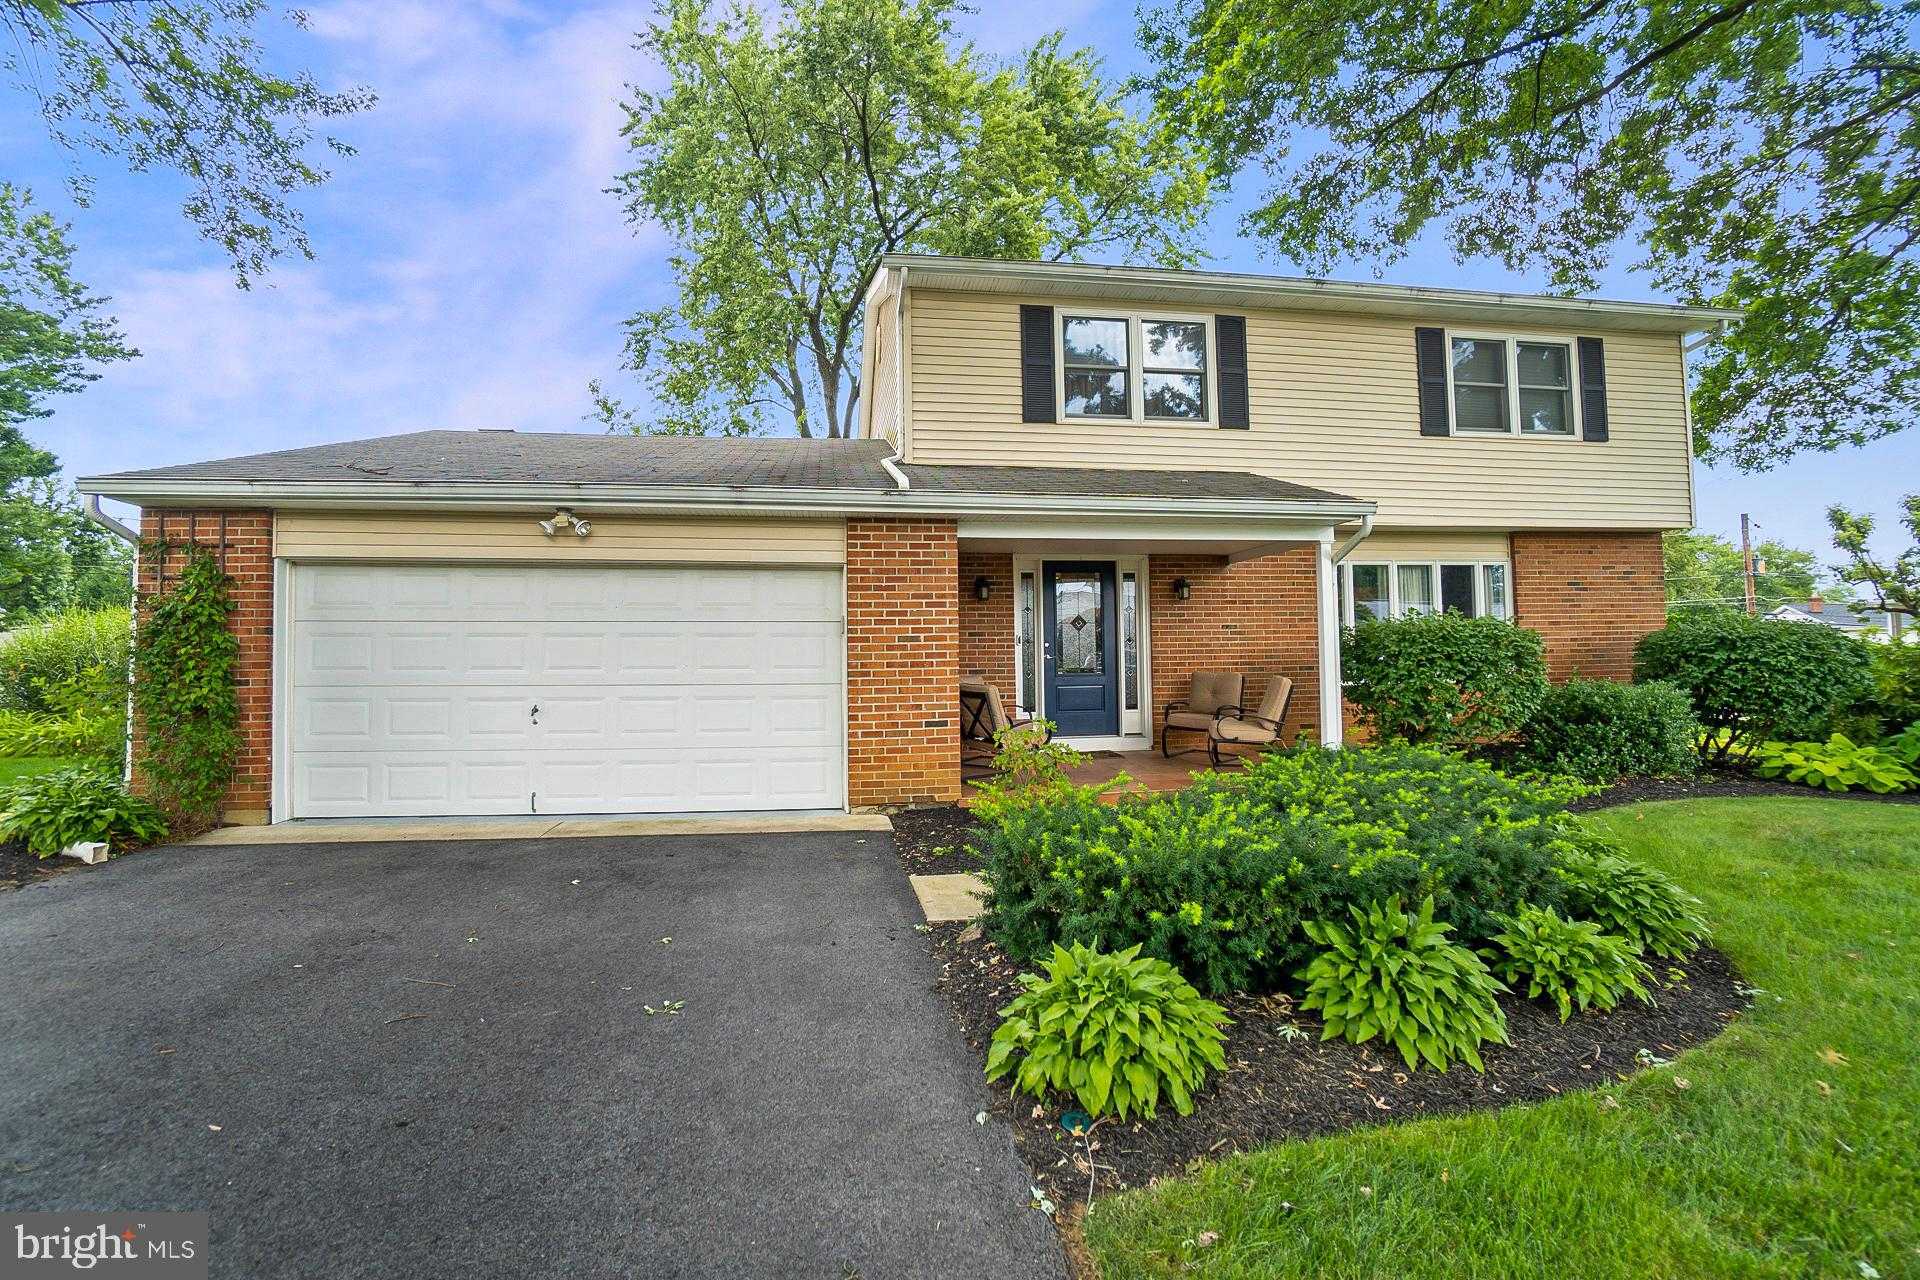 View MACUNGIE, PA 18062 house